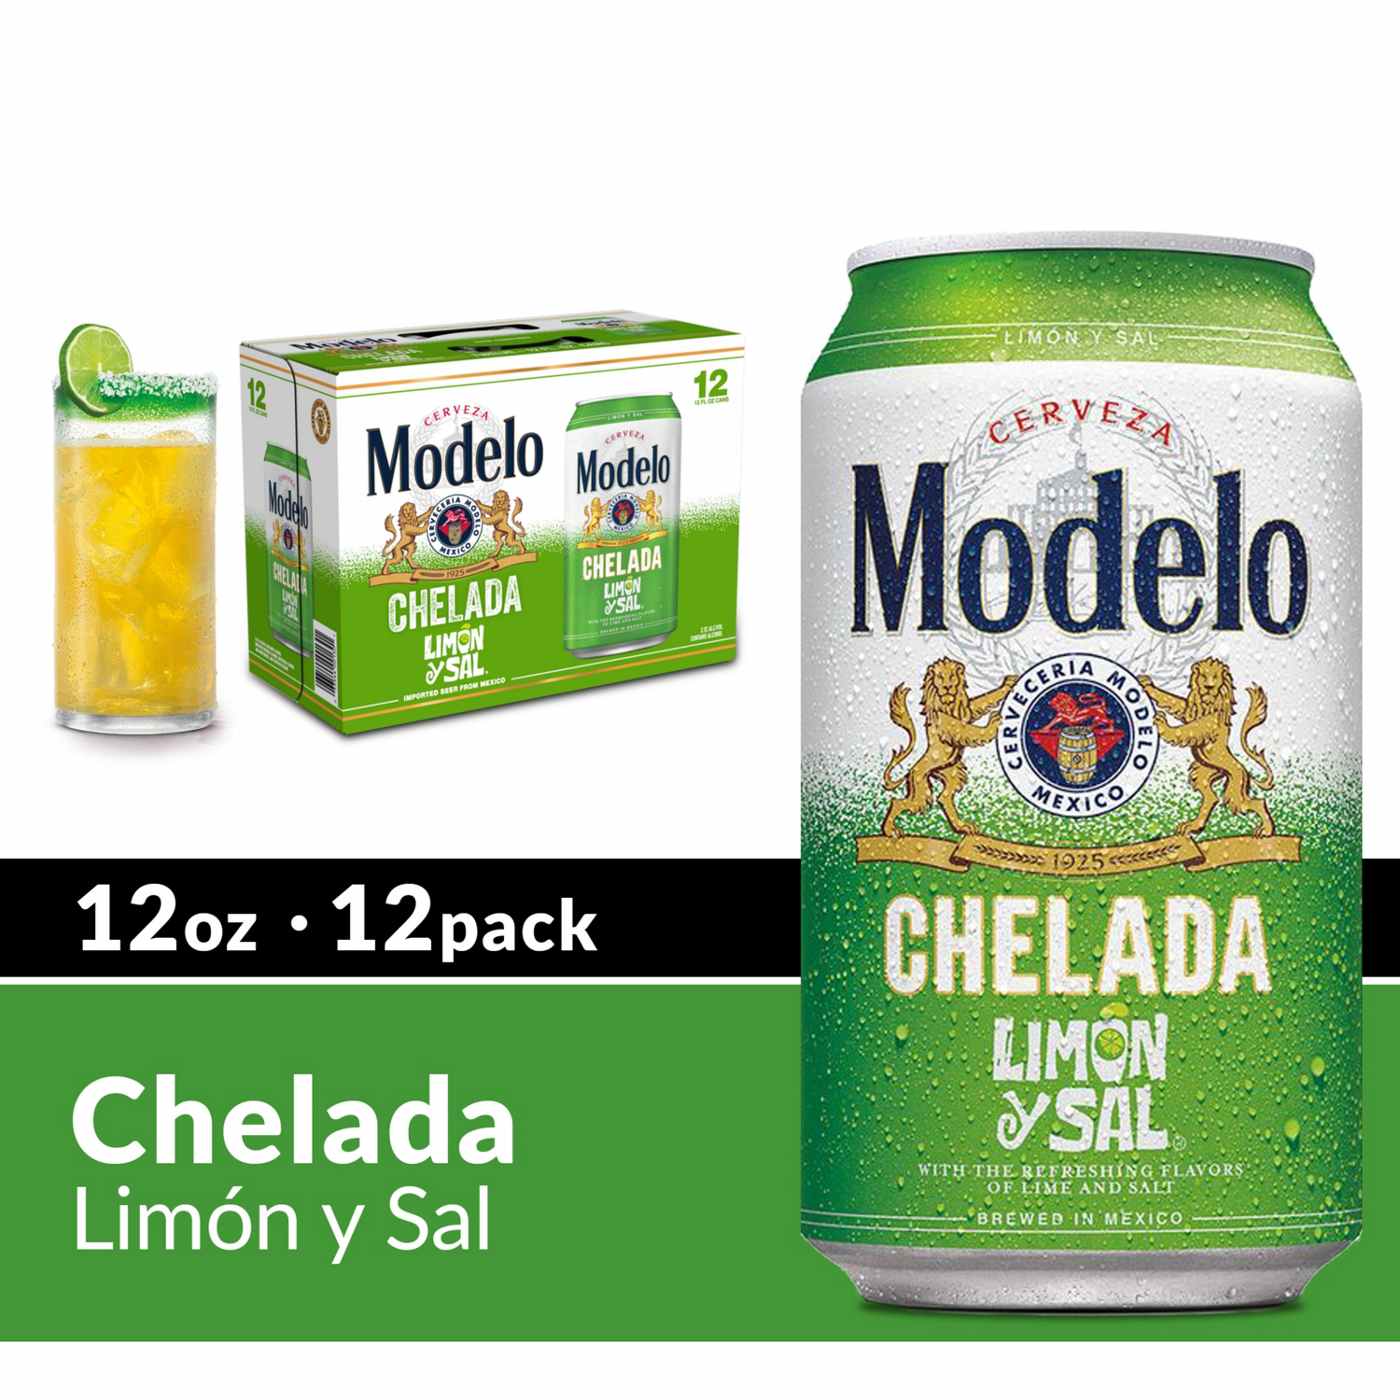 Modelo Chelada Limon y Sal Mexican Import Flavored Beer 12 oz Cans, 12 pk; image 4 of 9